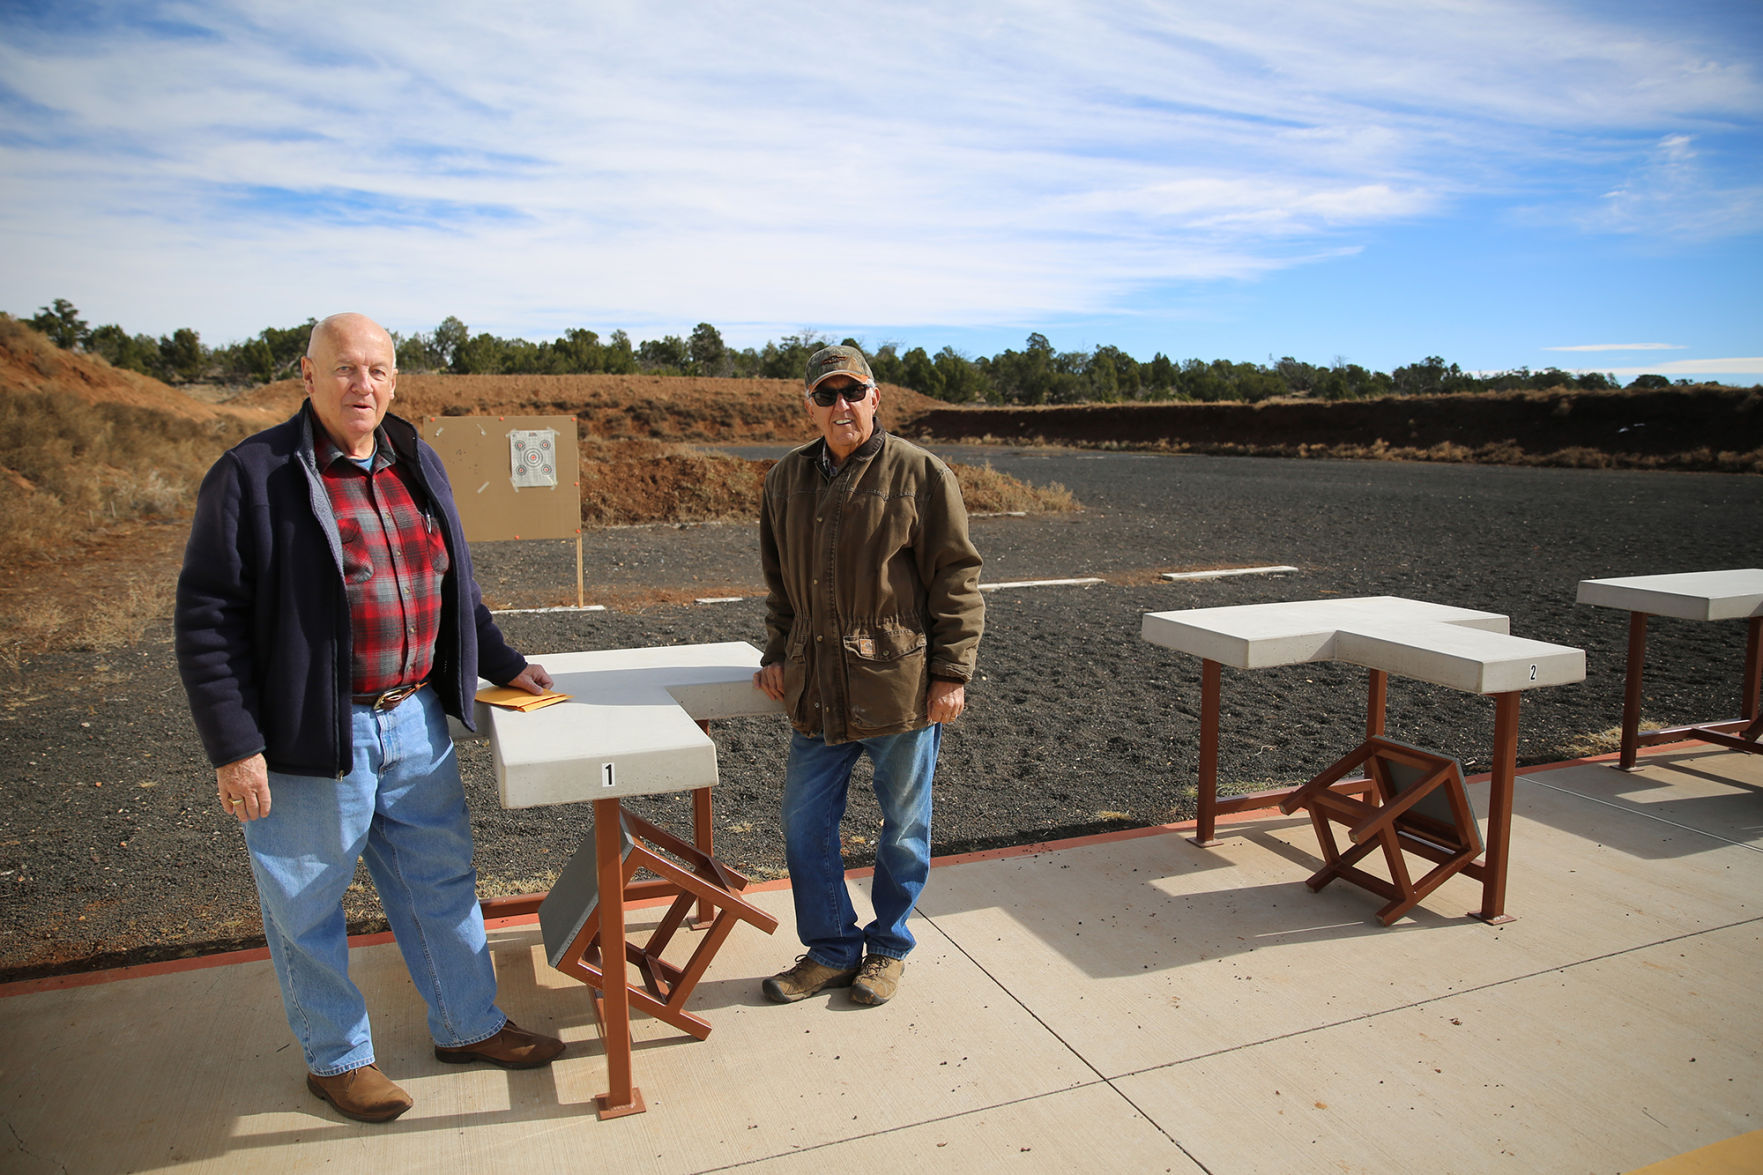 Shooting range gets new changes